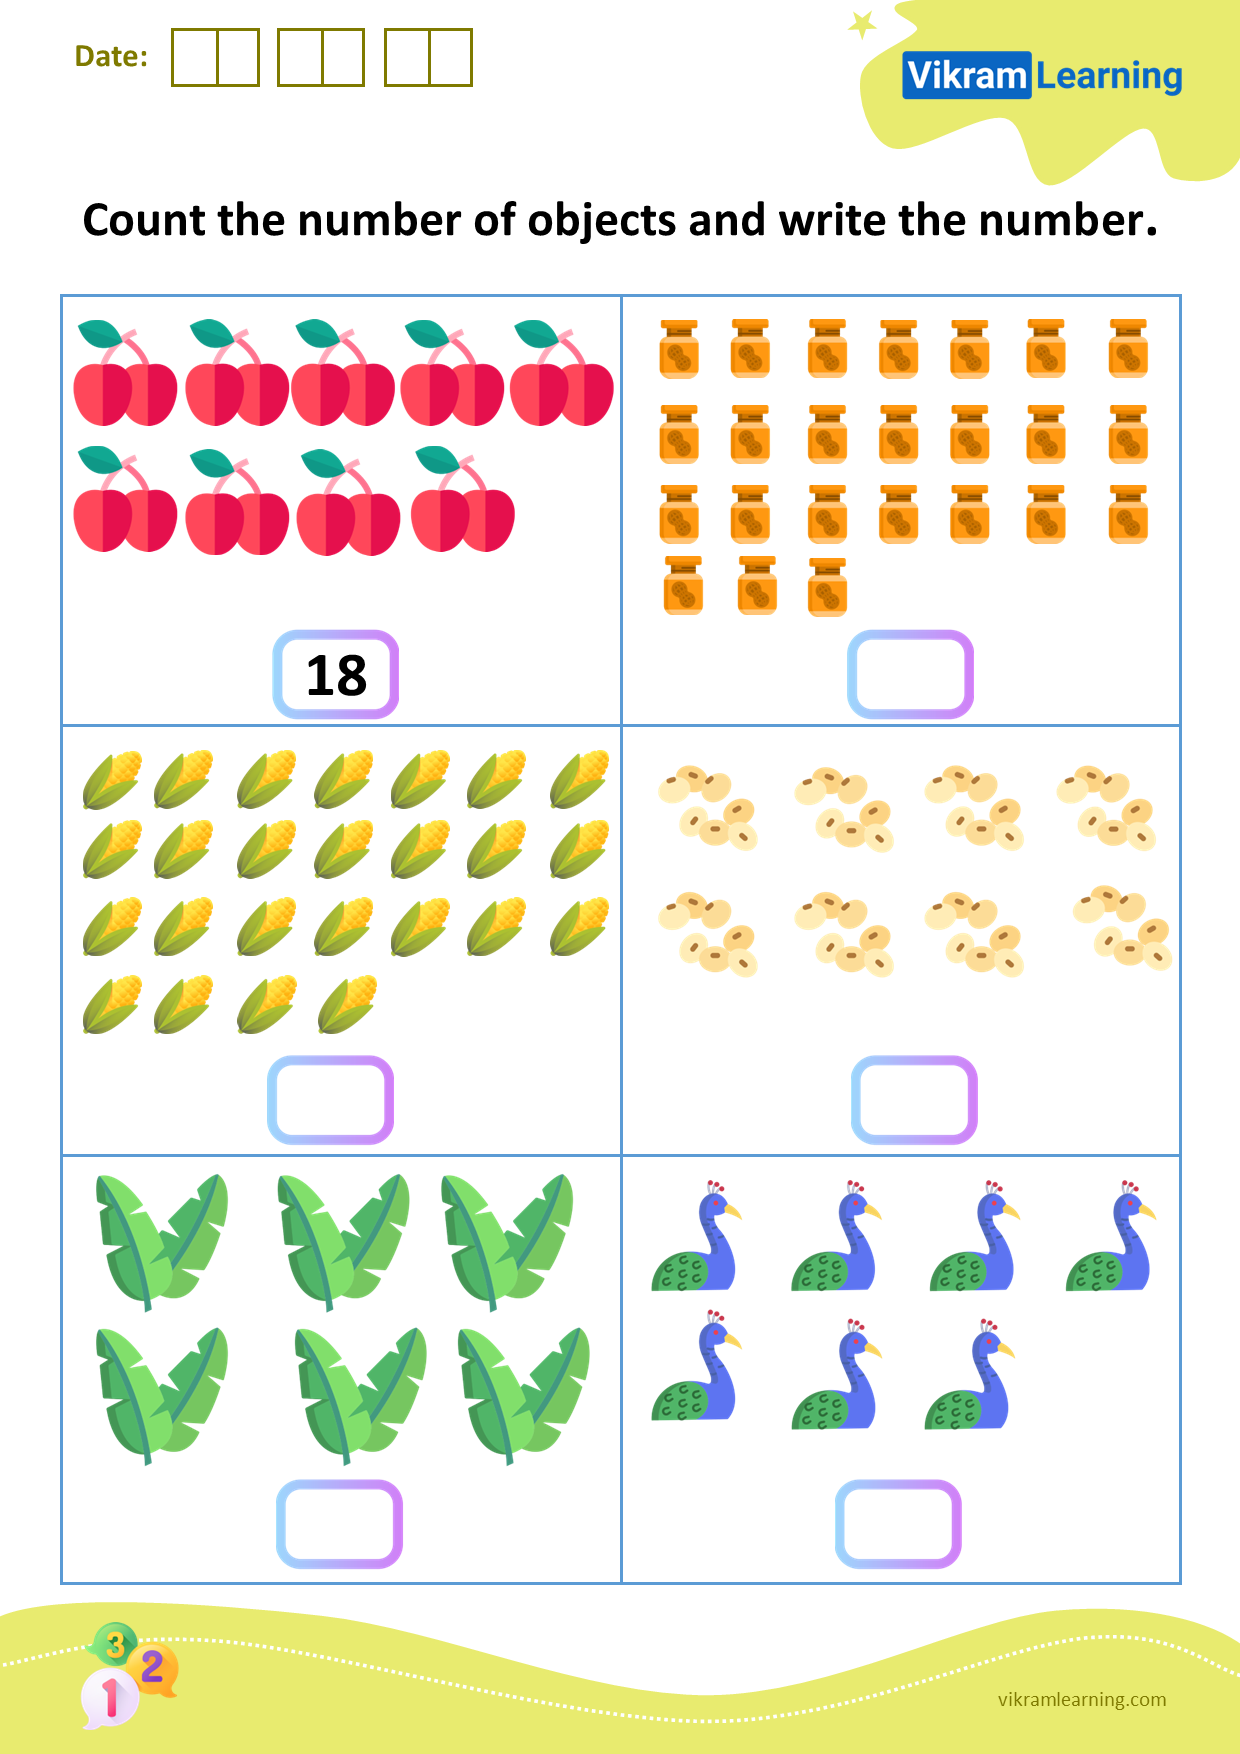 Download count the number of objects and write the number worksheets